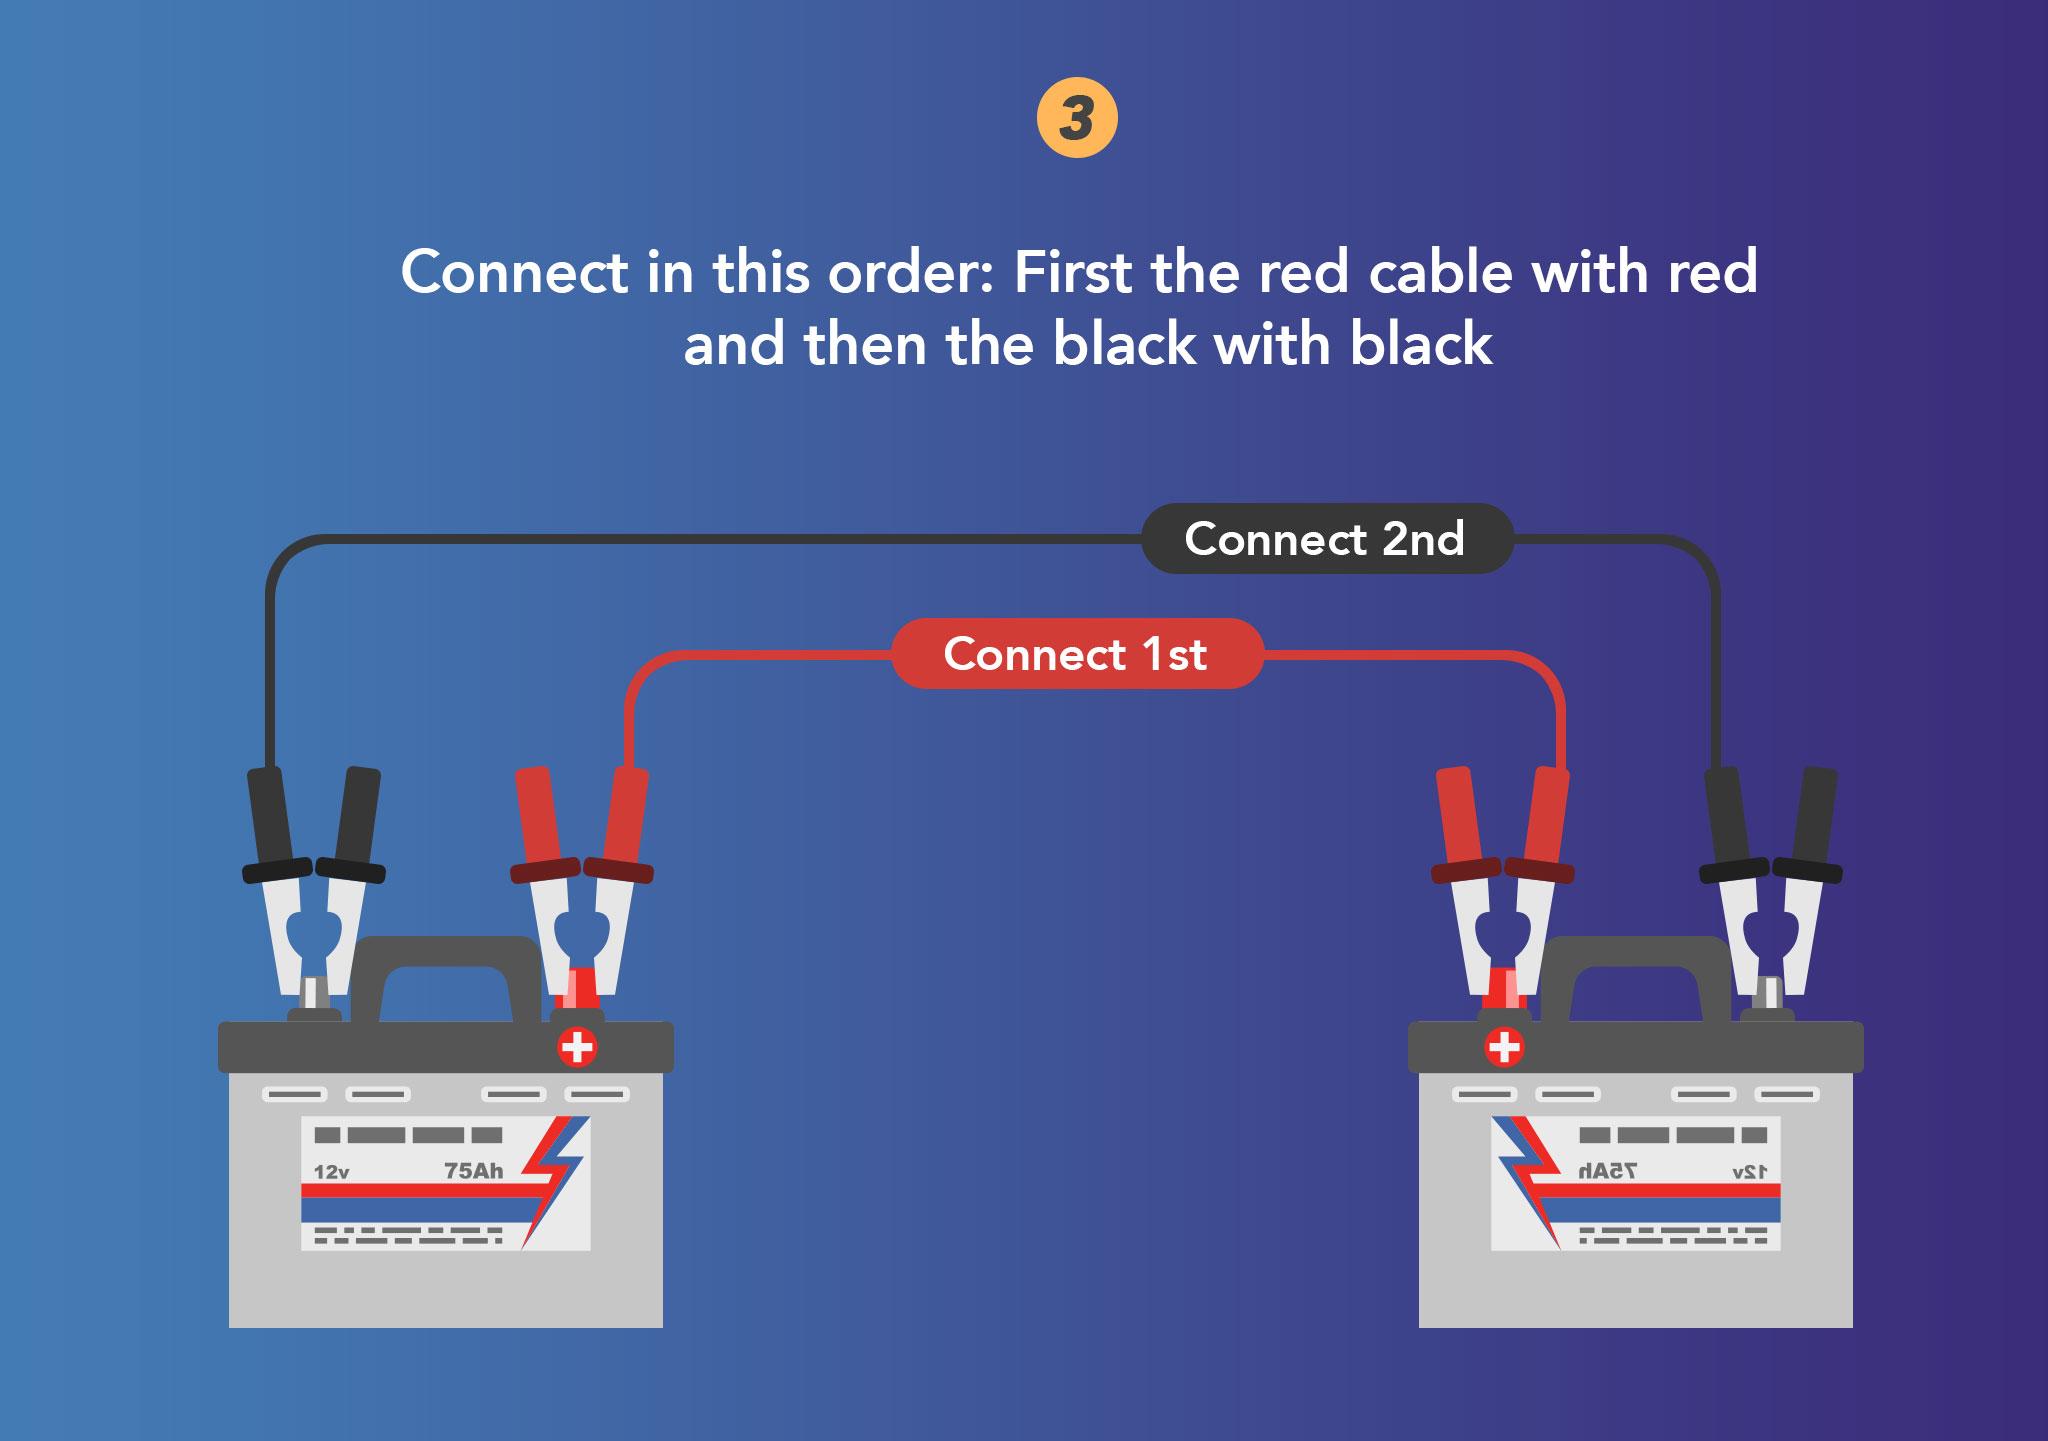 Connect in this order: First the red cable with red  and then the black with black